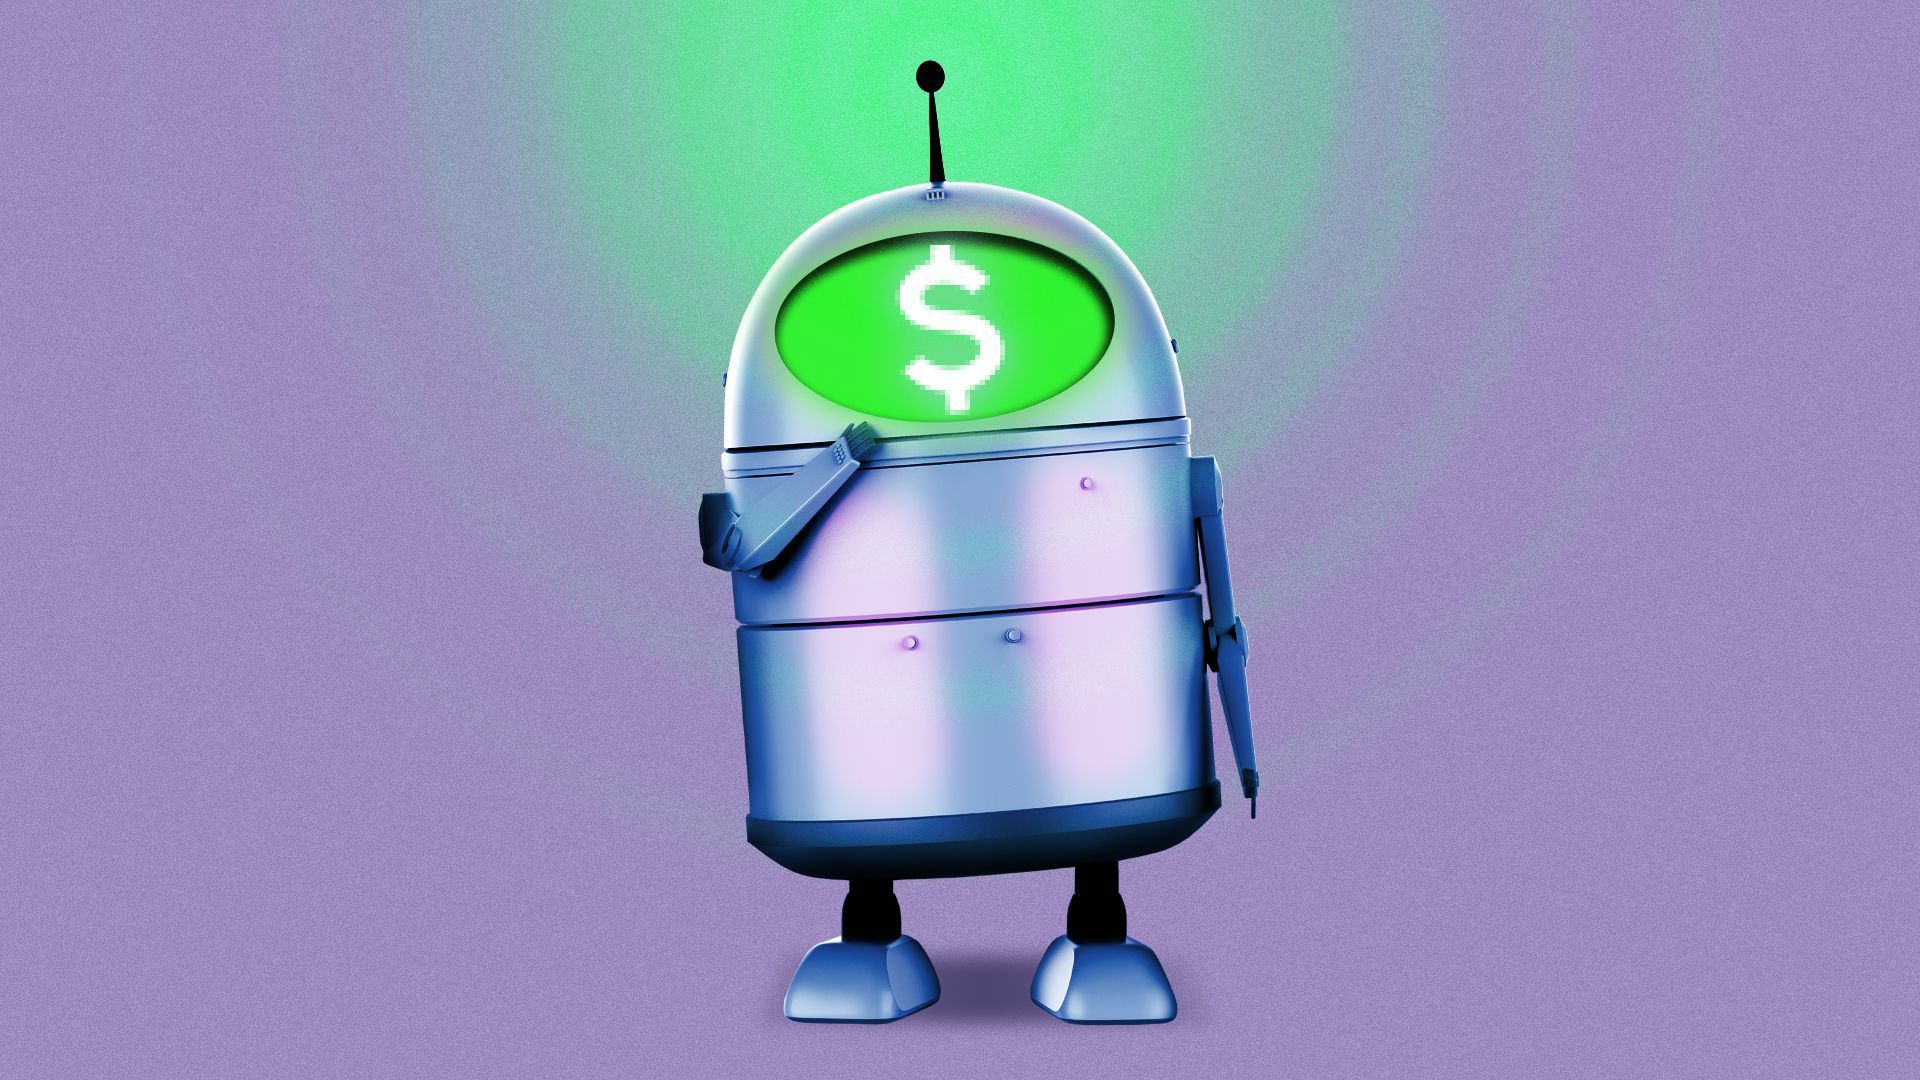 An illustration of a robot with an illuminated money symbol in it's display.